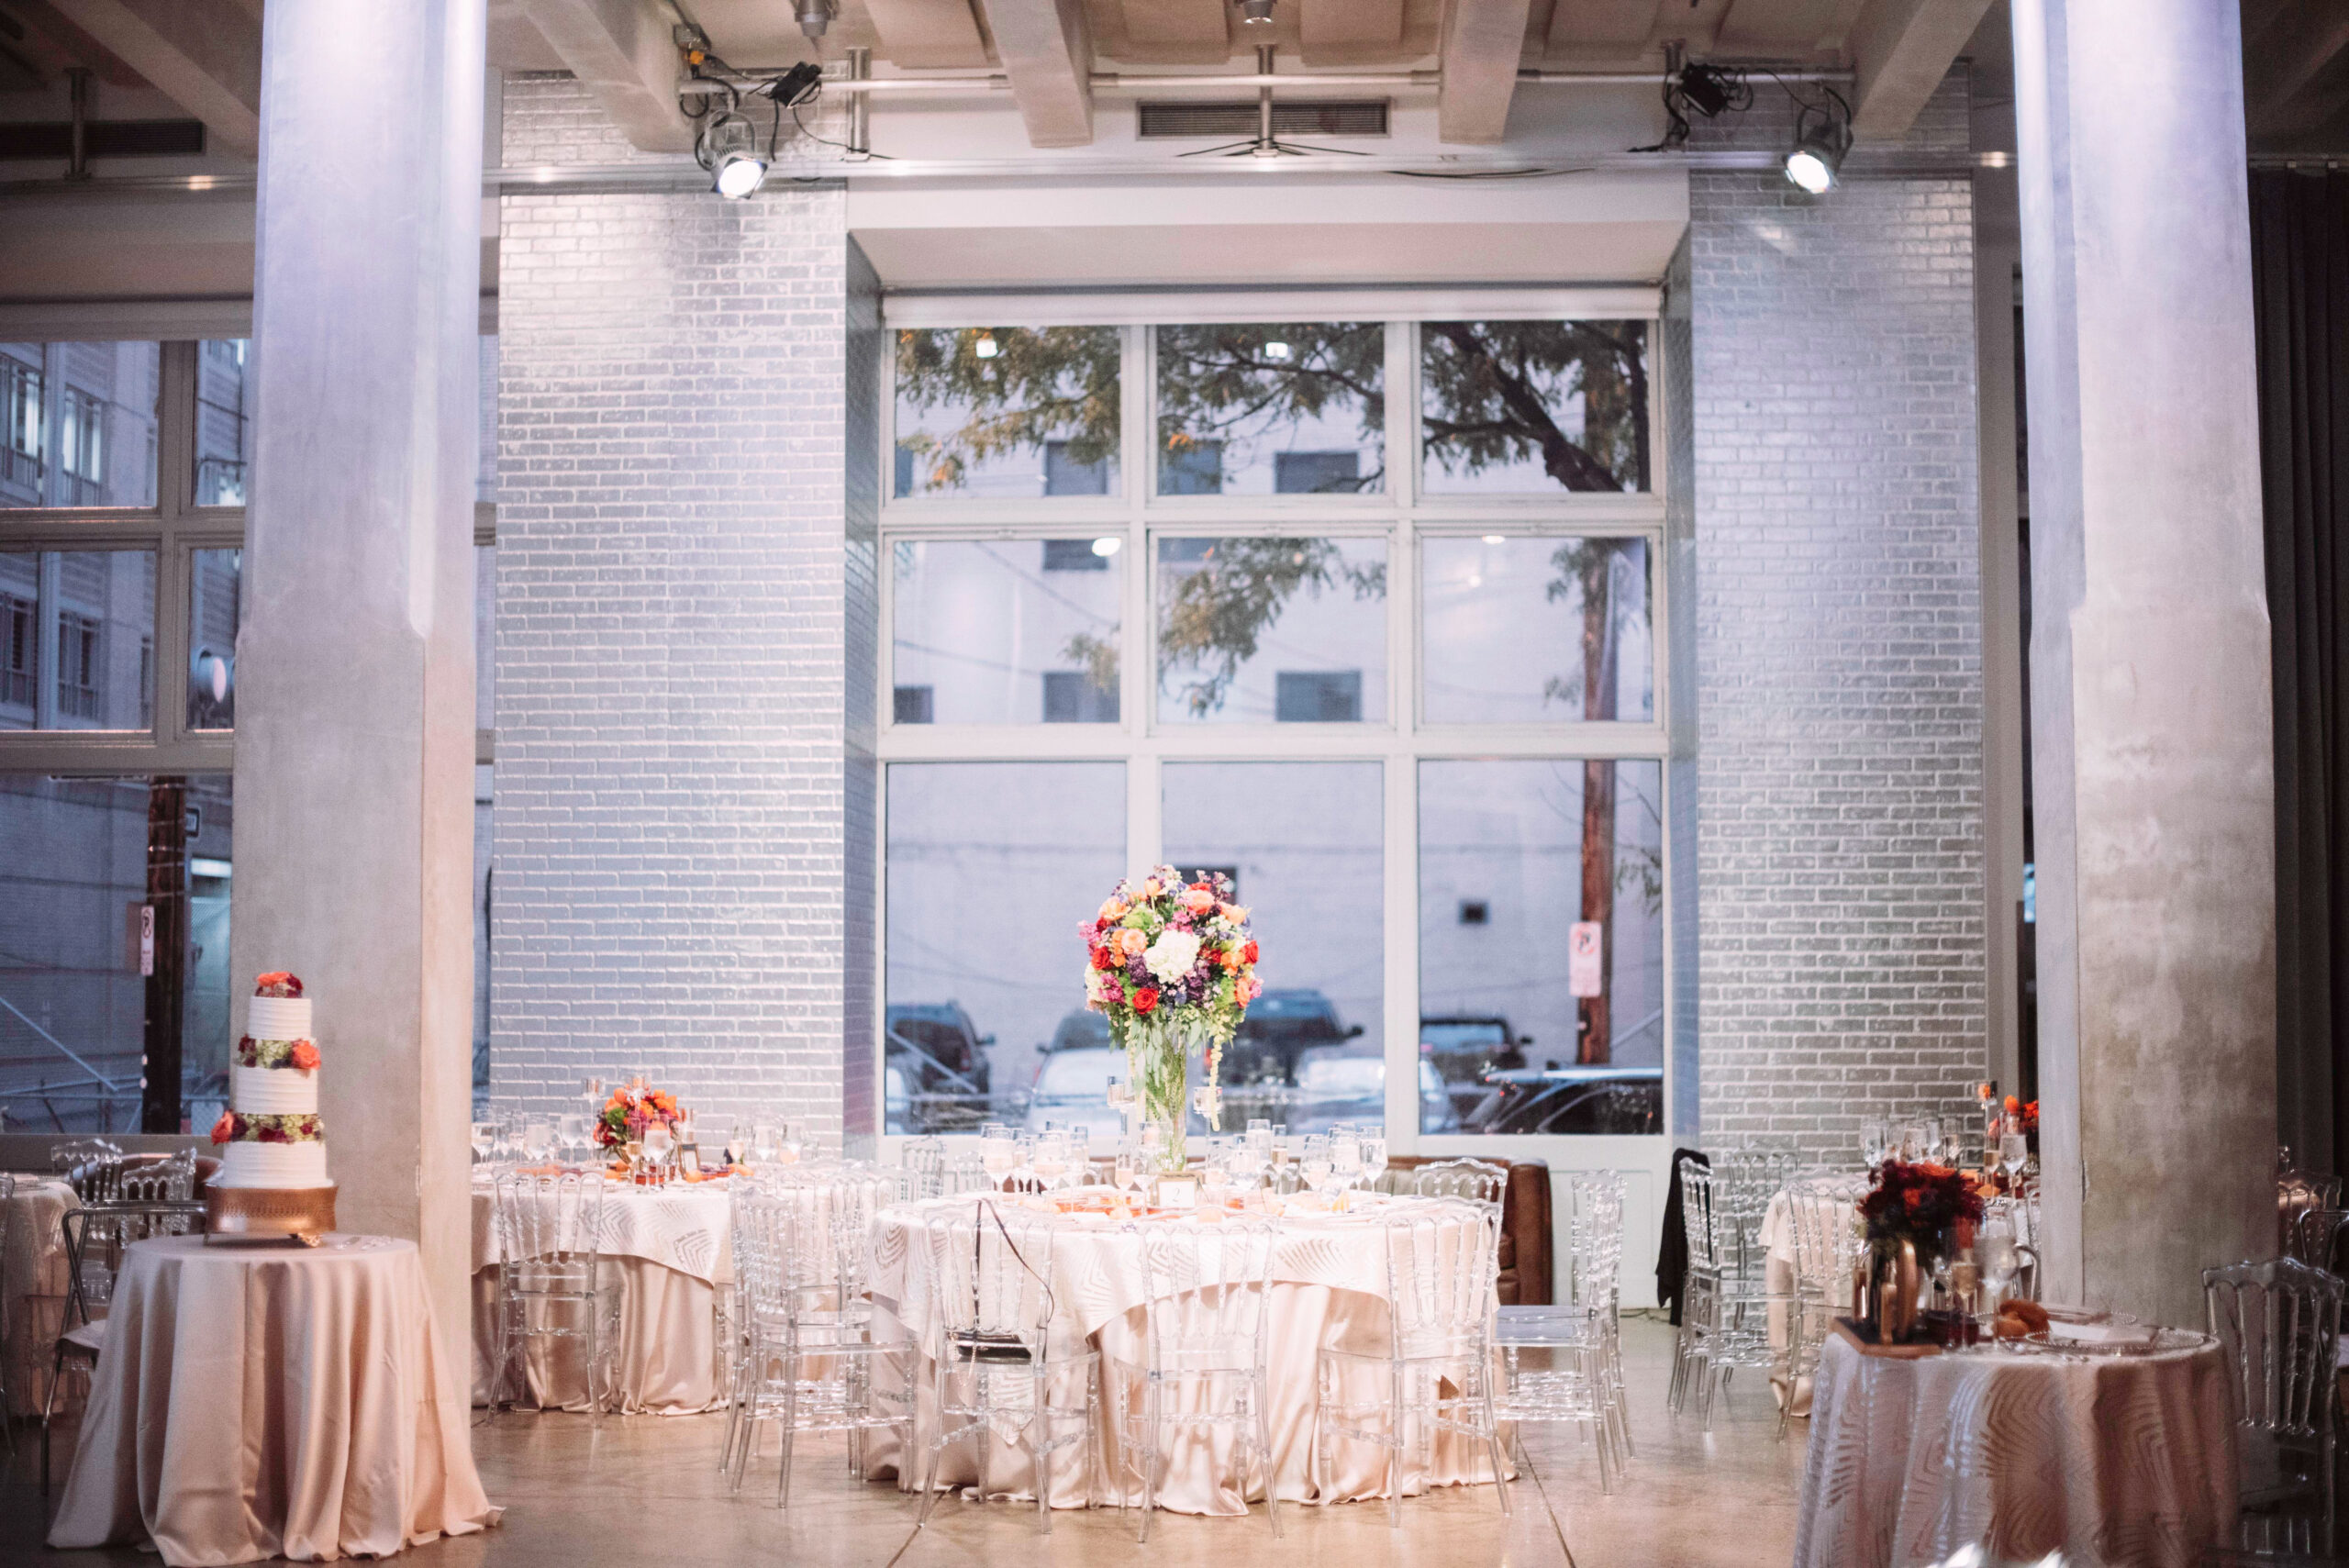 The Warhol entrance space with silver brick walls, two silver pillars, and a large window in the background. Five tables with white tablecloths and clear, plastic chairs and flower centerpieces. A tiered wedding cake is on a table on the left of the photo.